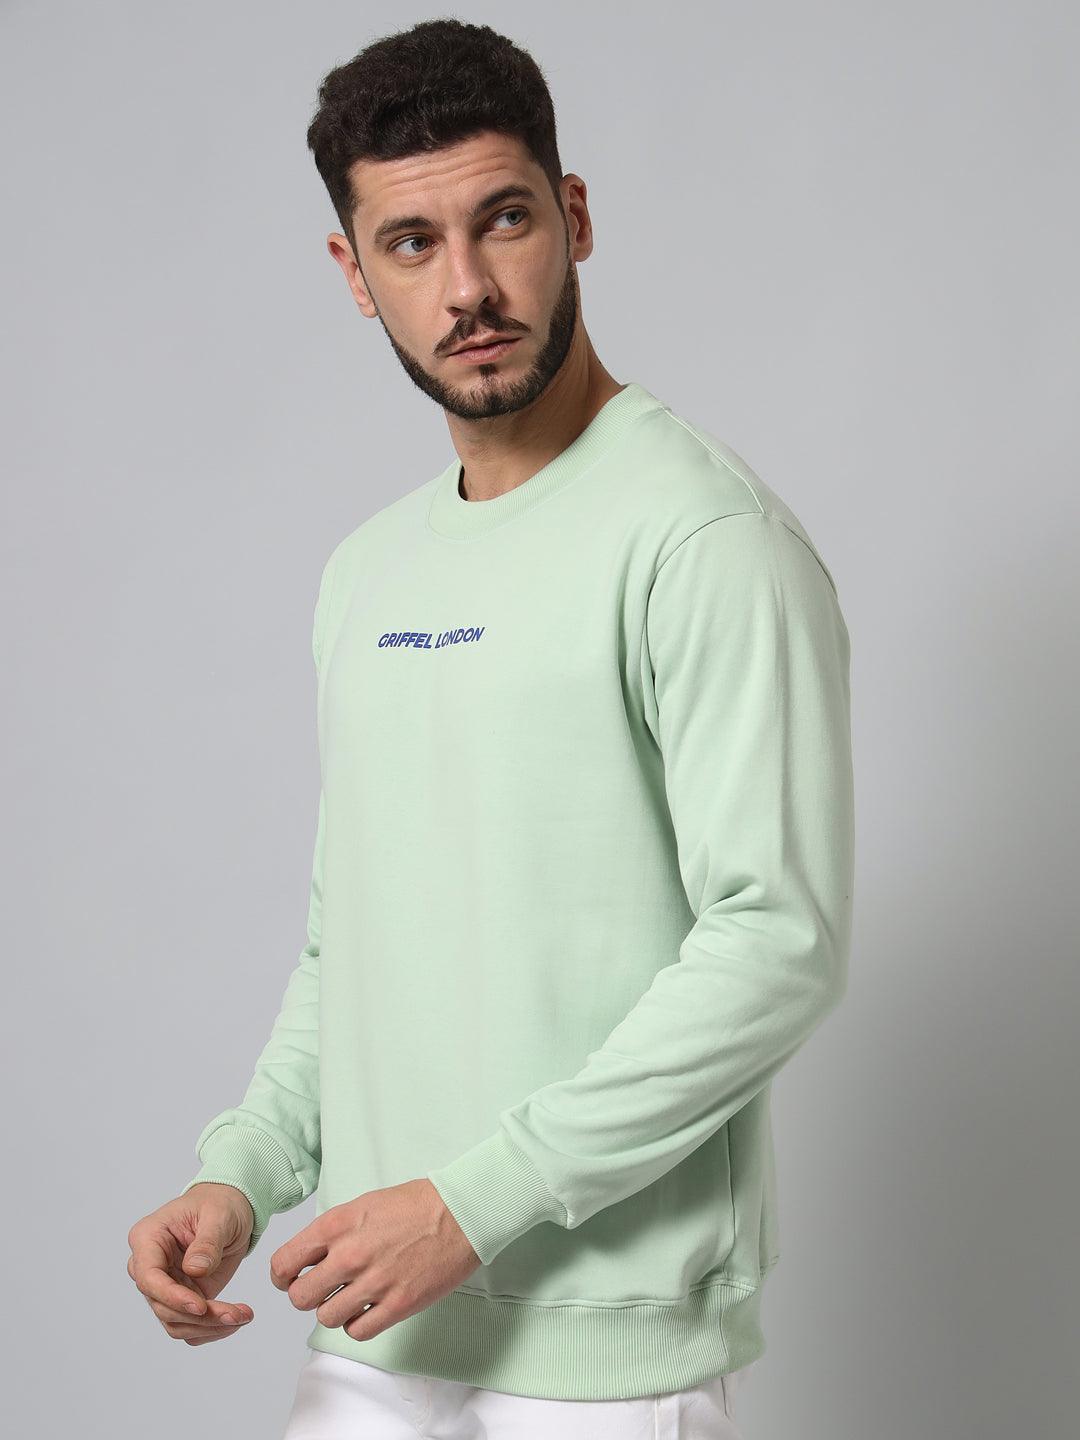 Griffel Men's Cotton Fleece Round Neck Sea Green Sweatshirt with Full Sleeve and Front Logo Print - griffel